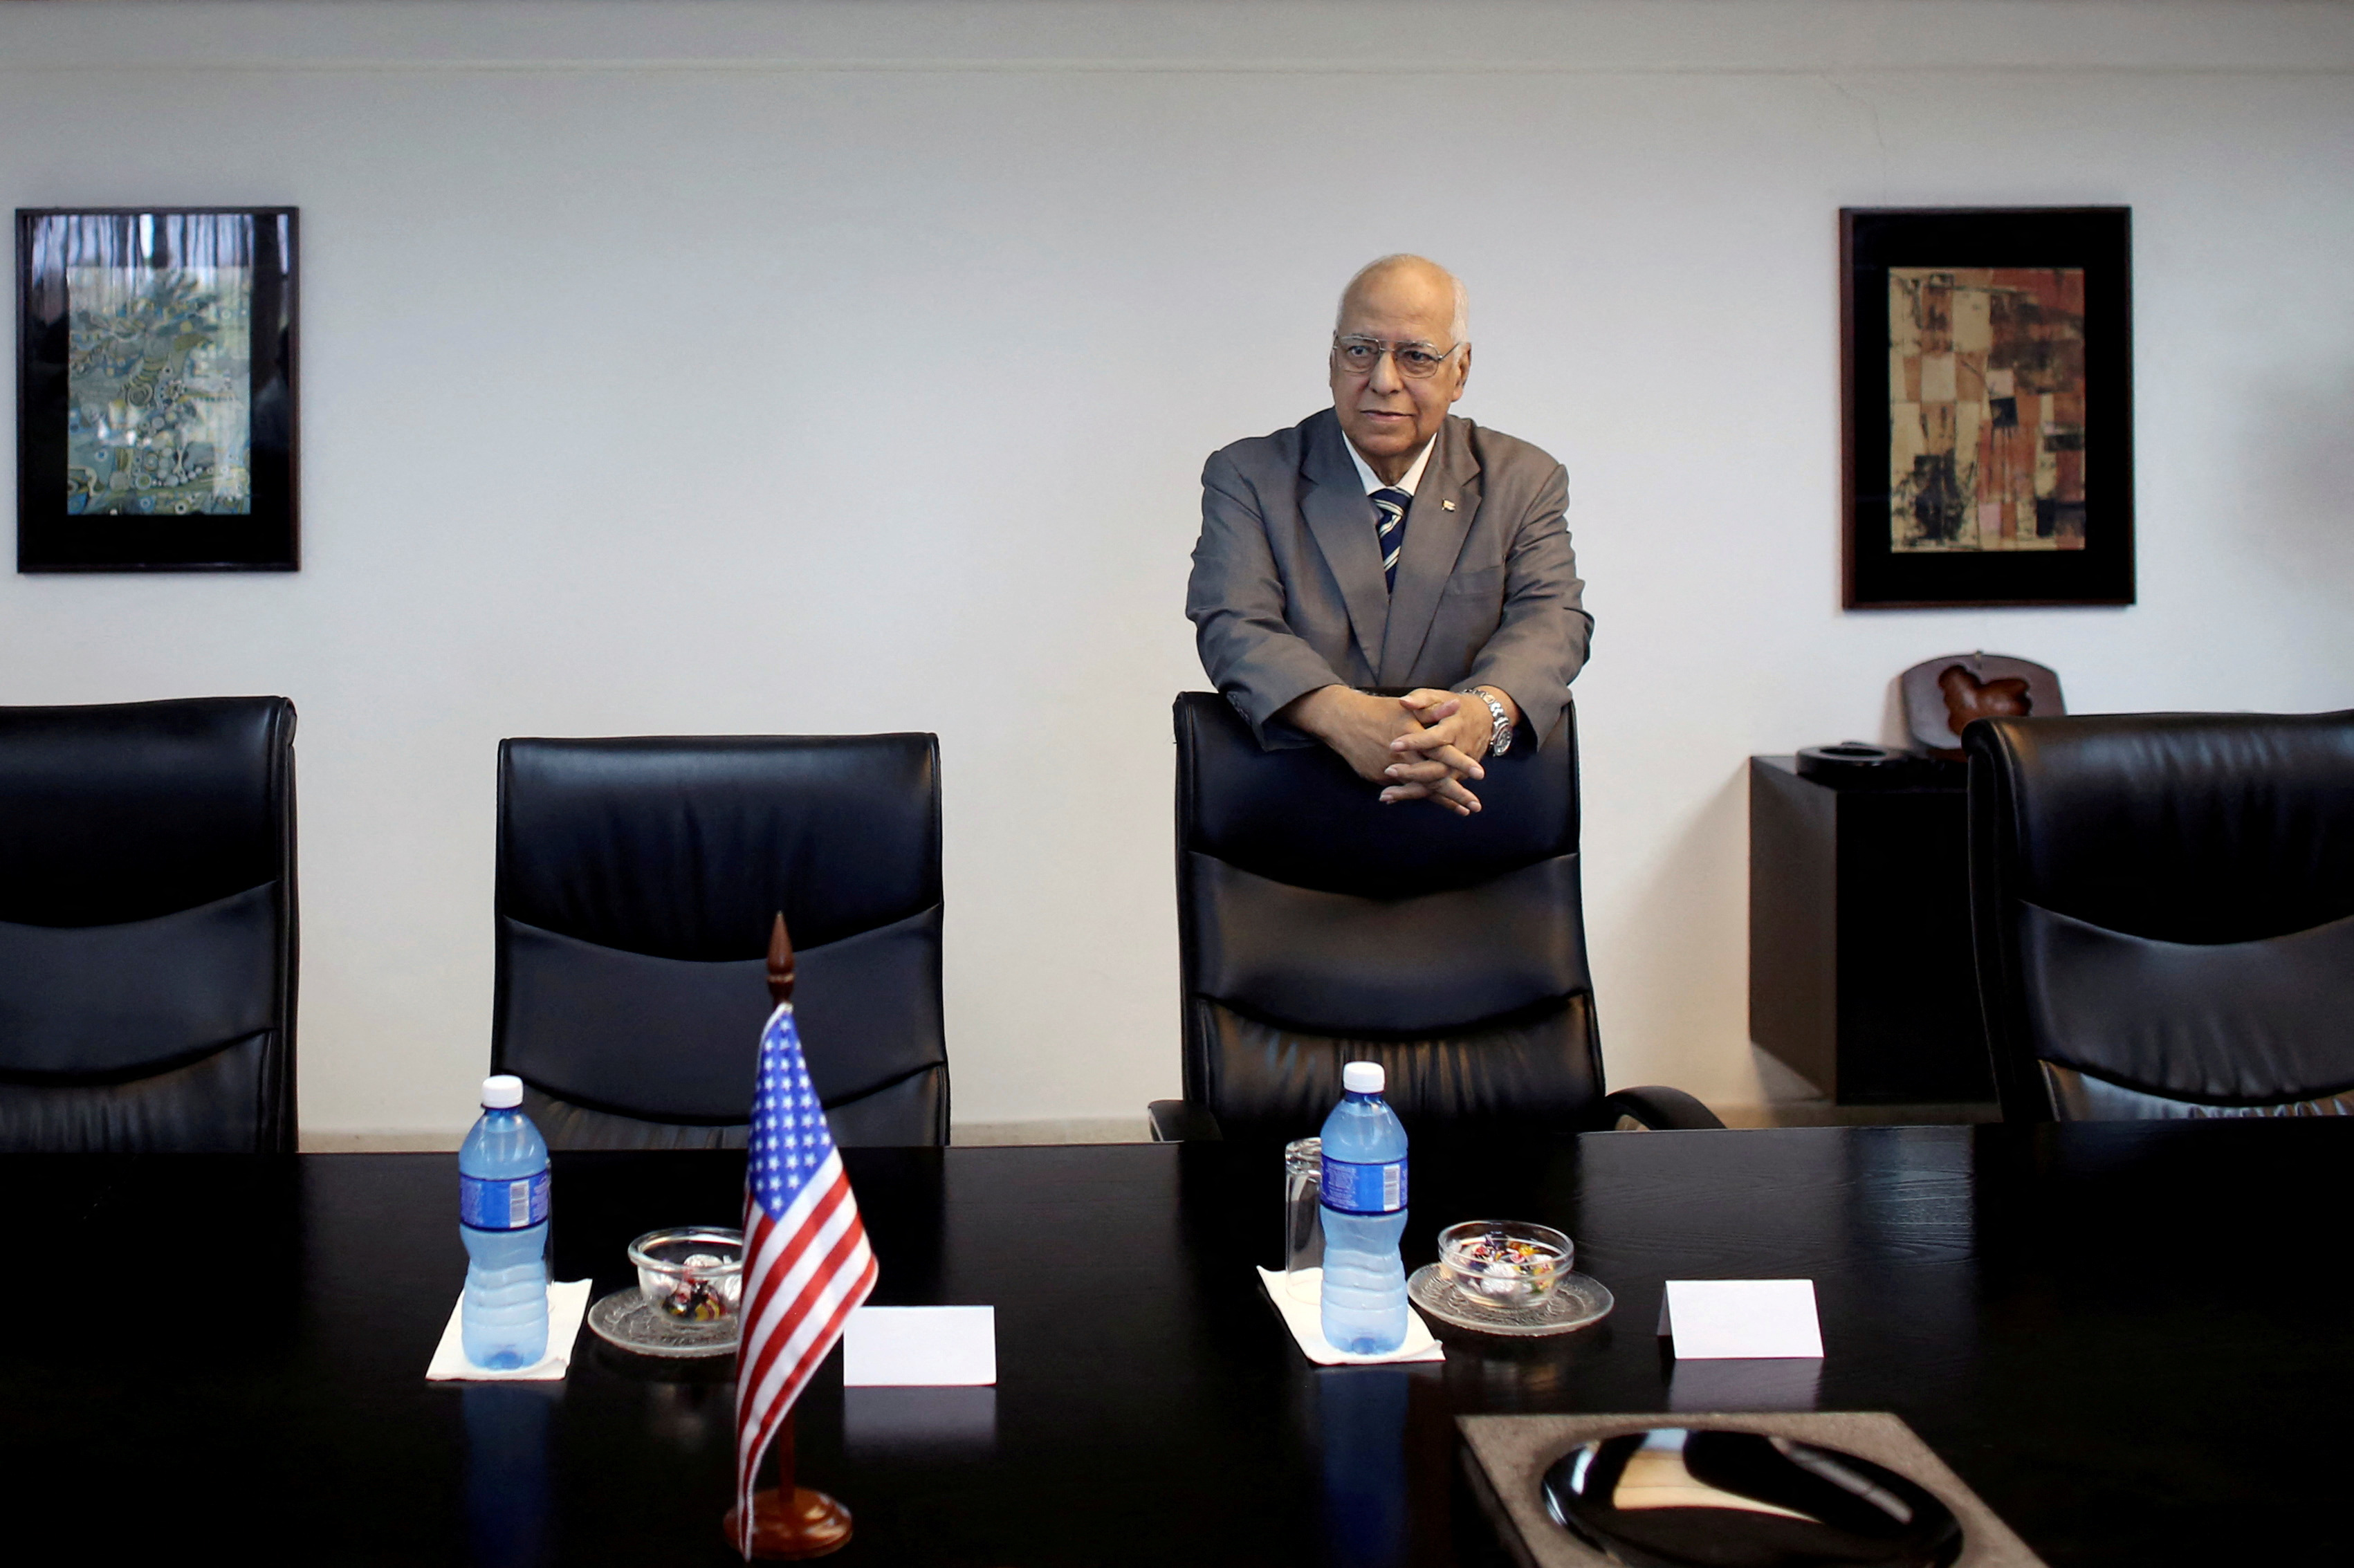 Vice President of Cuba's Council of Ministers Ricardo Cabrisas Ruiz waits for the arrival of Missouri Governor Jay Nixon for a meeting in Havana, Cuba